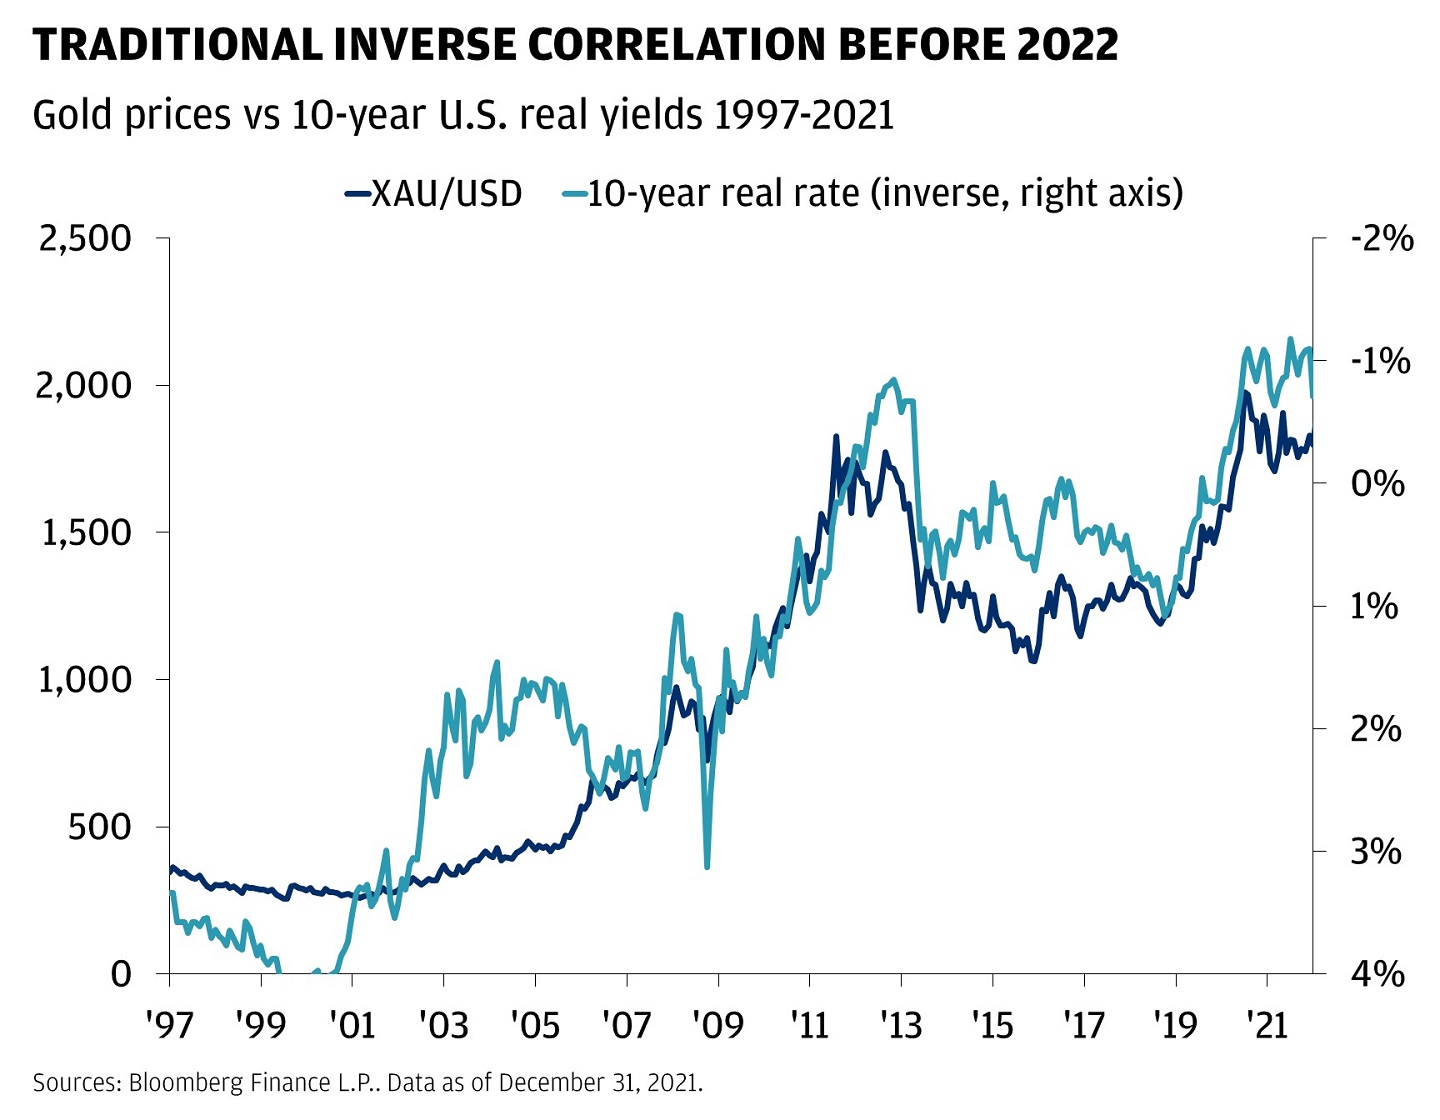 This line chart shows the historical correlation between gold price and 10-year real treasury yields from 1997 to 2022.